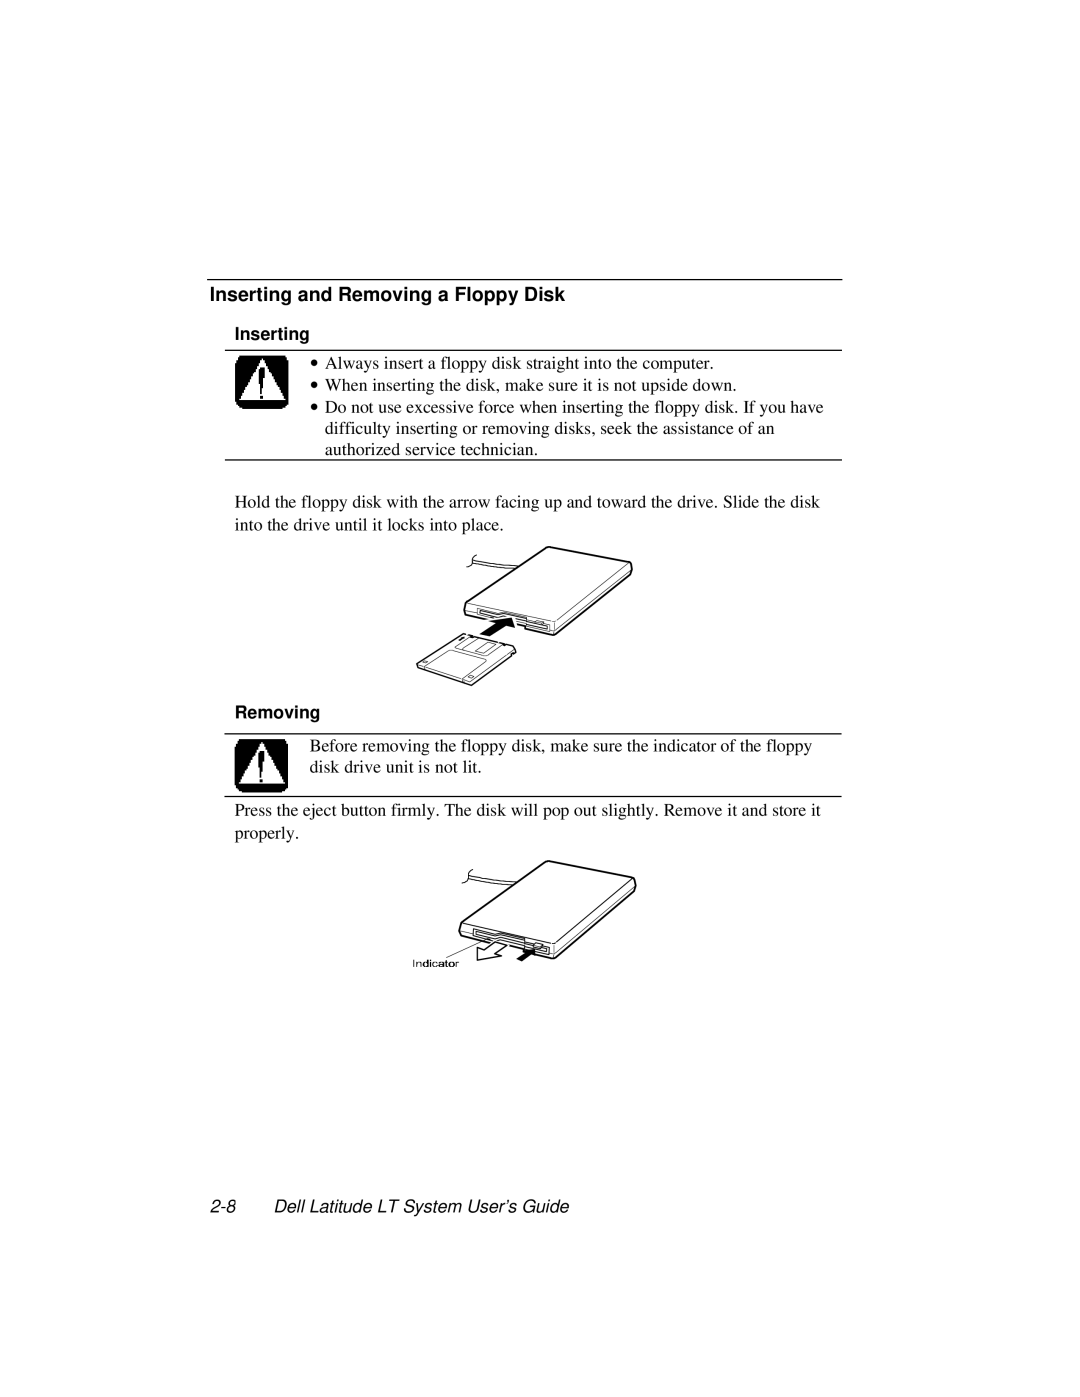 Dell LT System manual Inserting and Removing a Floppy Disk 